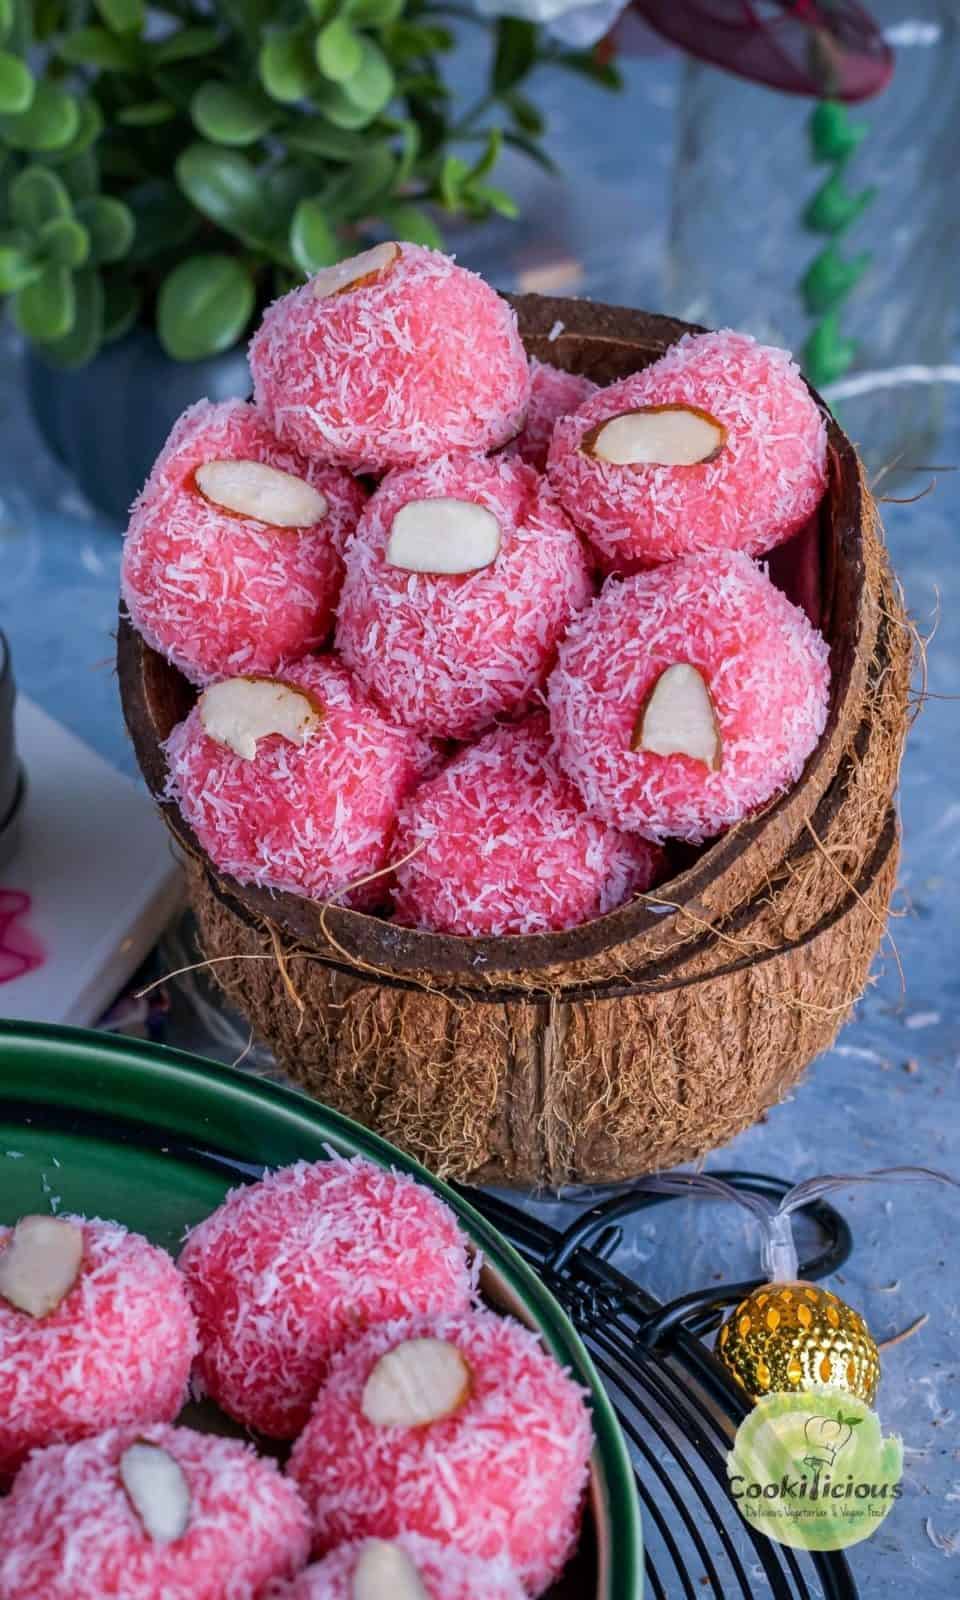 coconut shells filled with Instant Rose flavored Coconut Ladoo